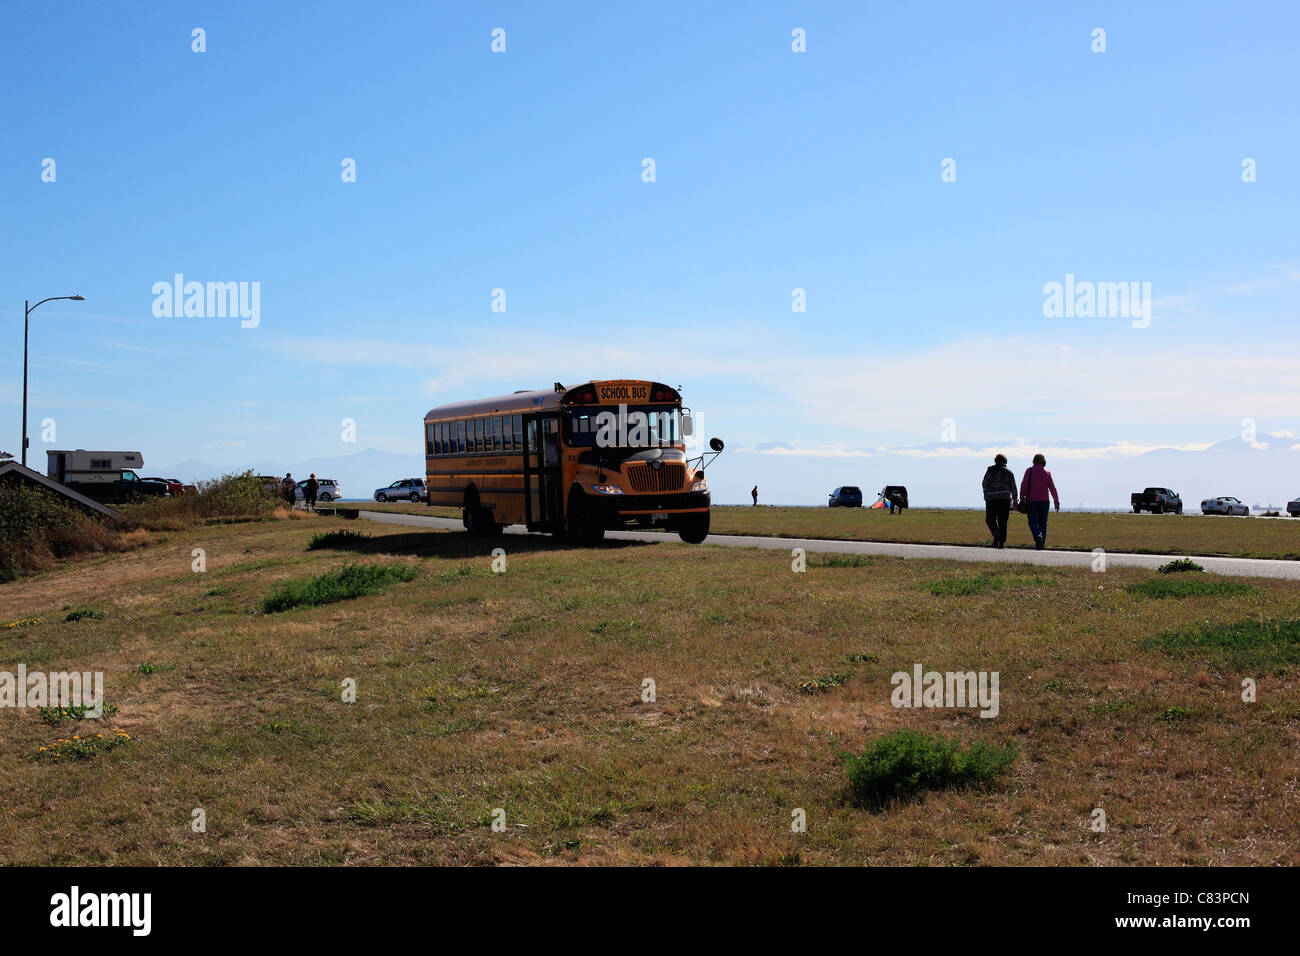 School bus at clover point Stock Photo